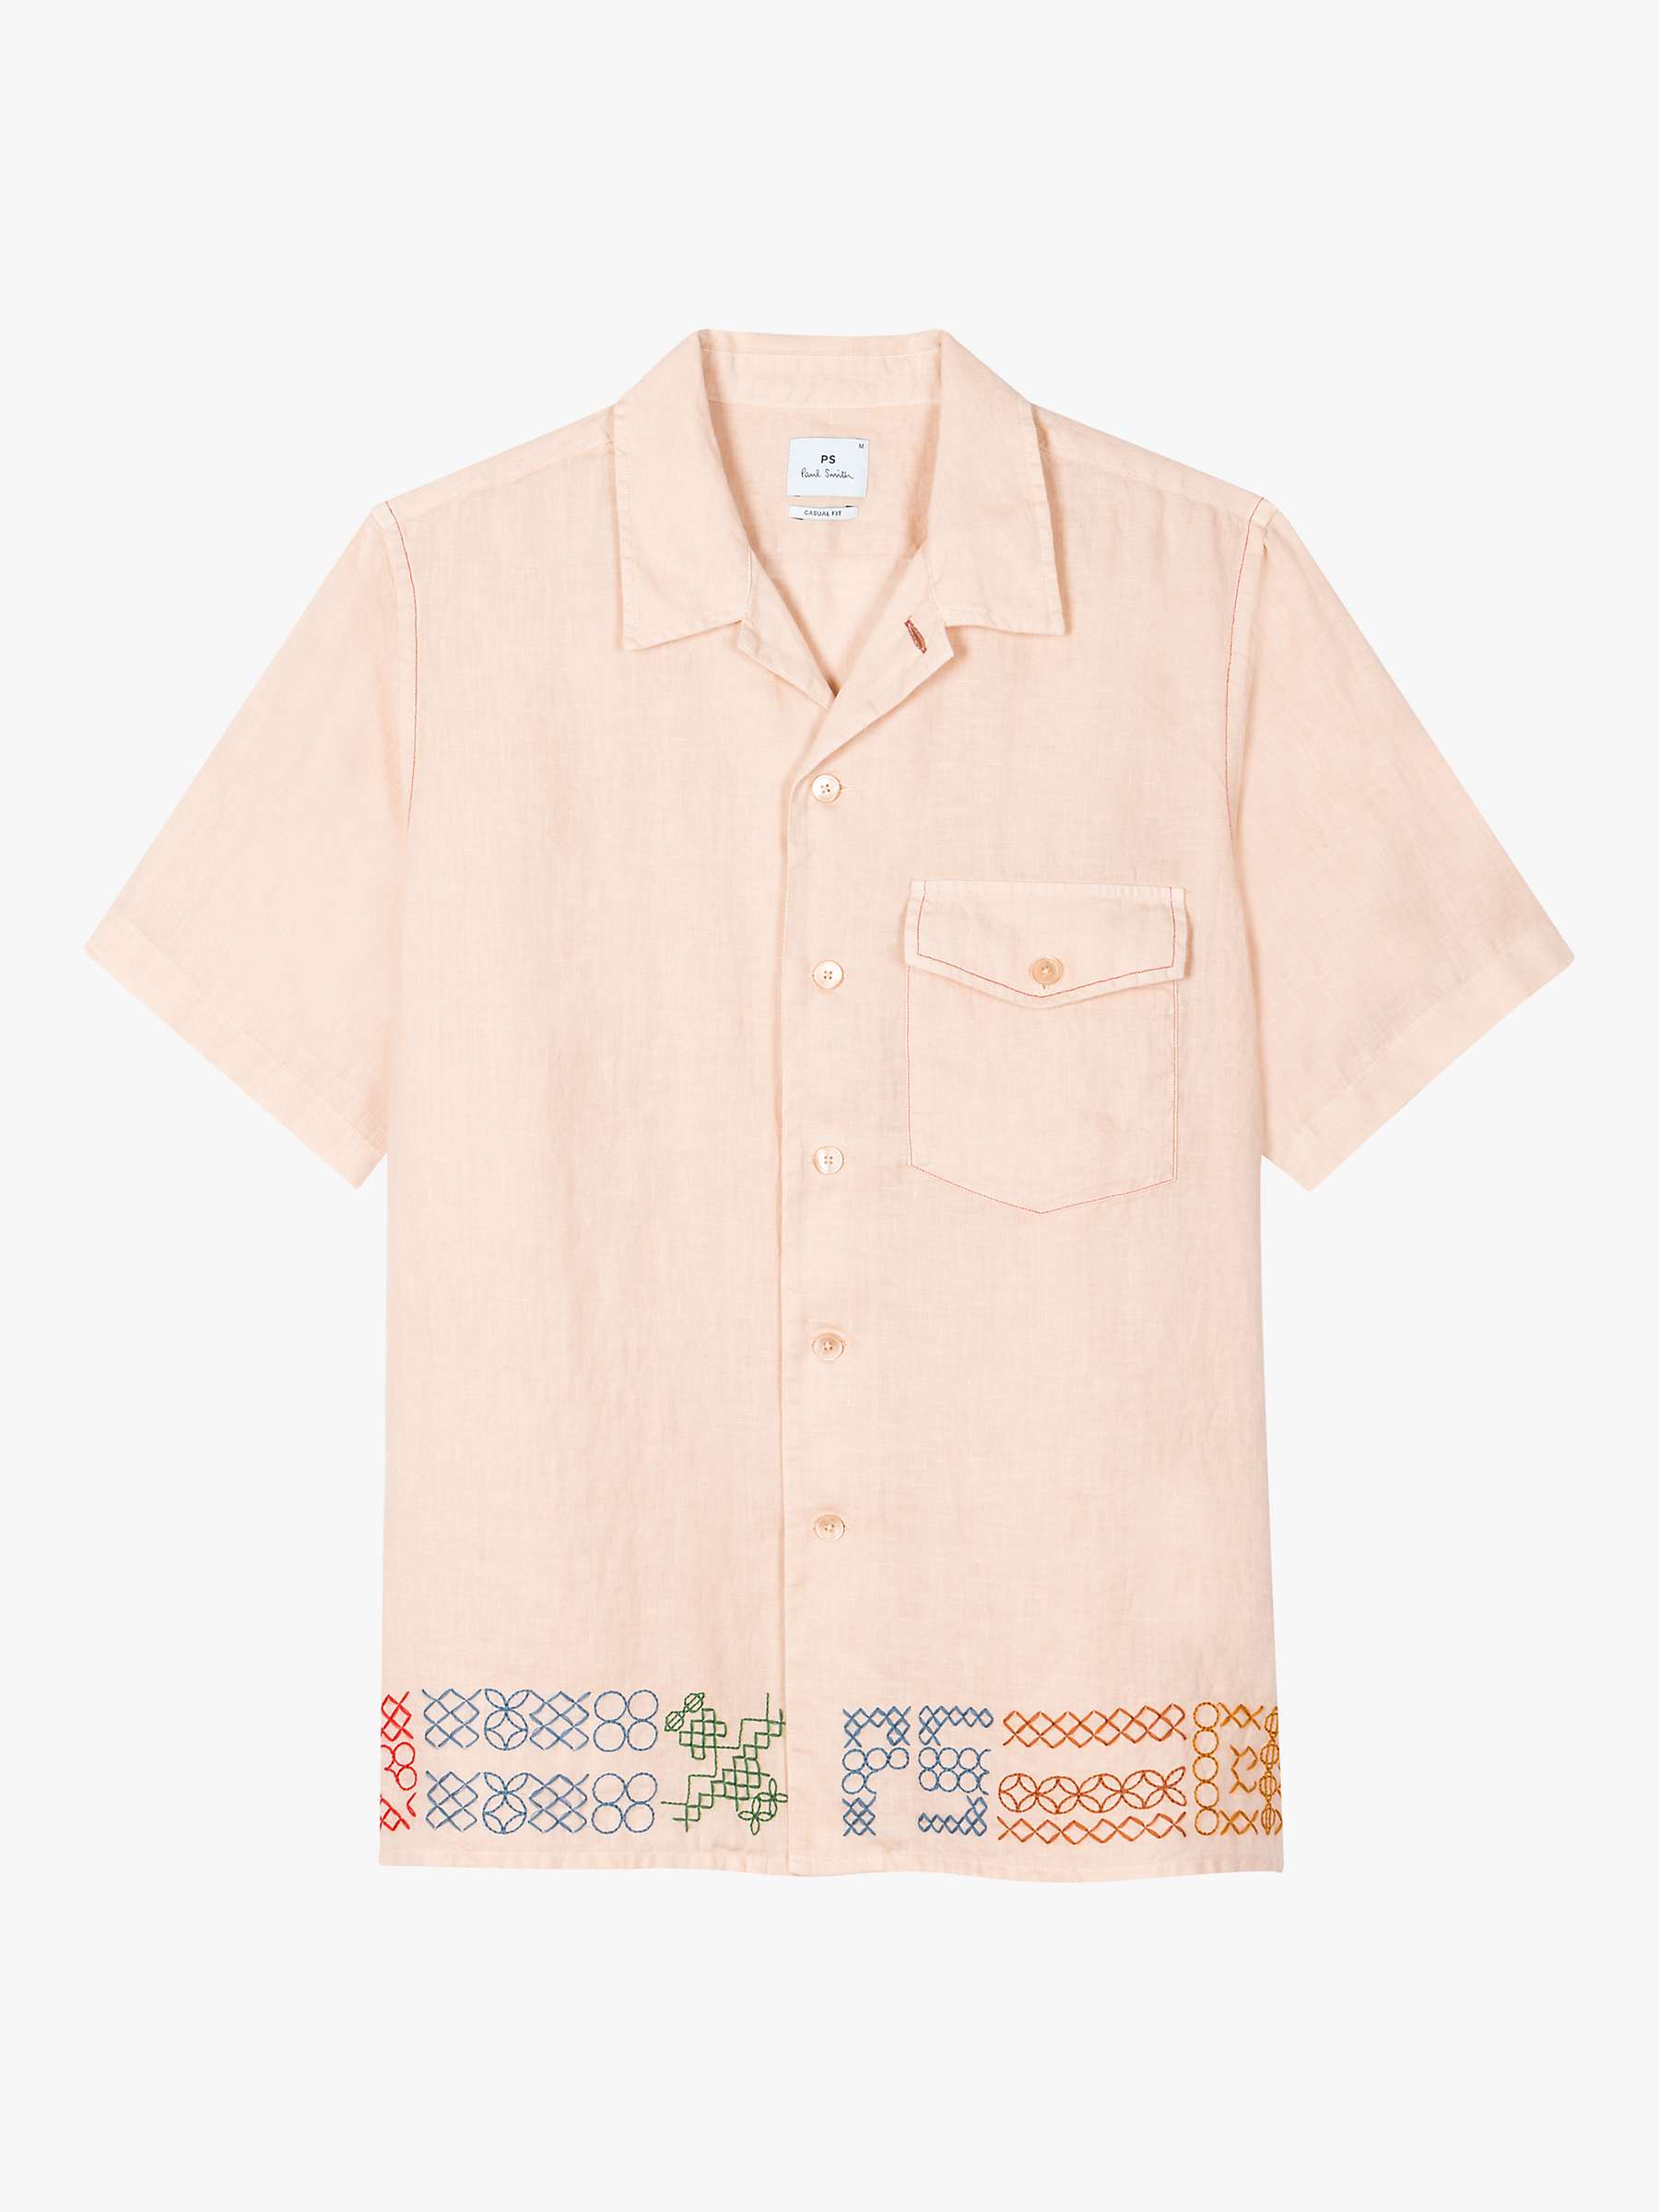 Buy Paul Smith Short Sleeve Causal Fit Embroidery Shirt, Brown Online at johnlewis.com